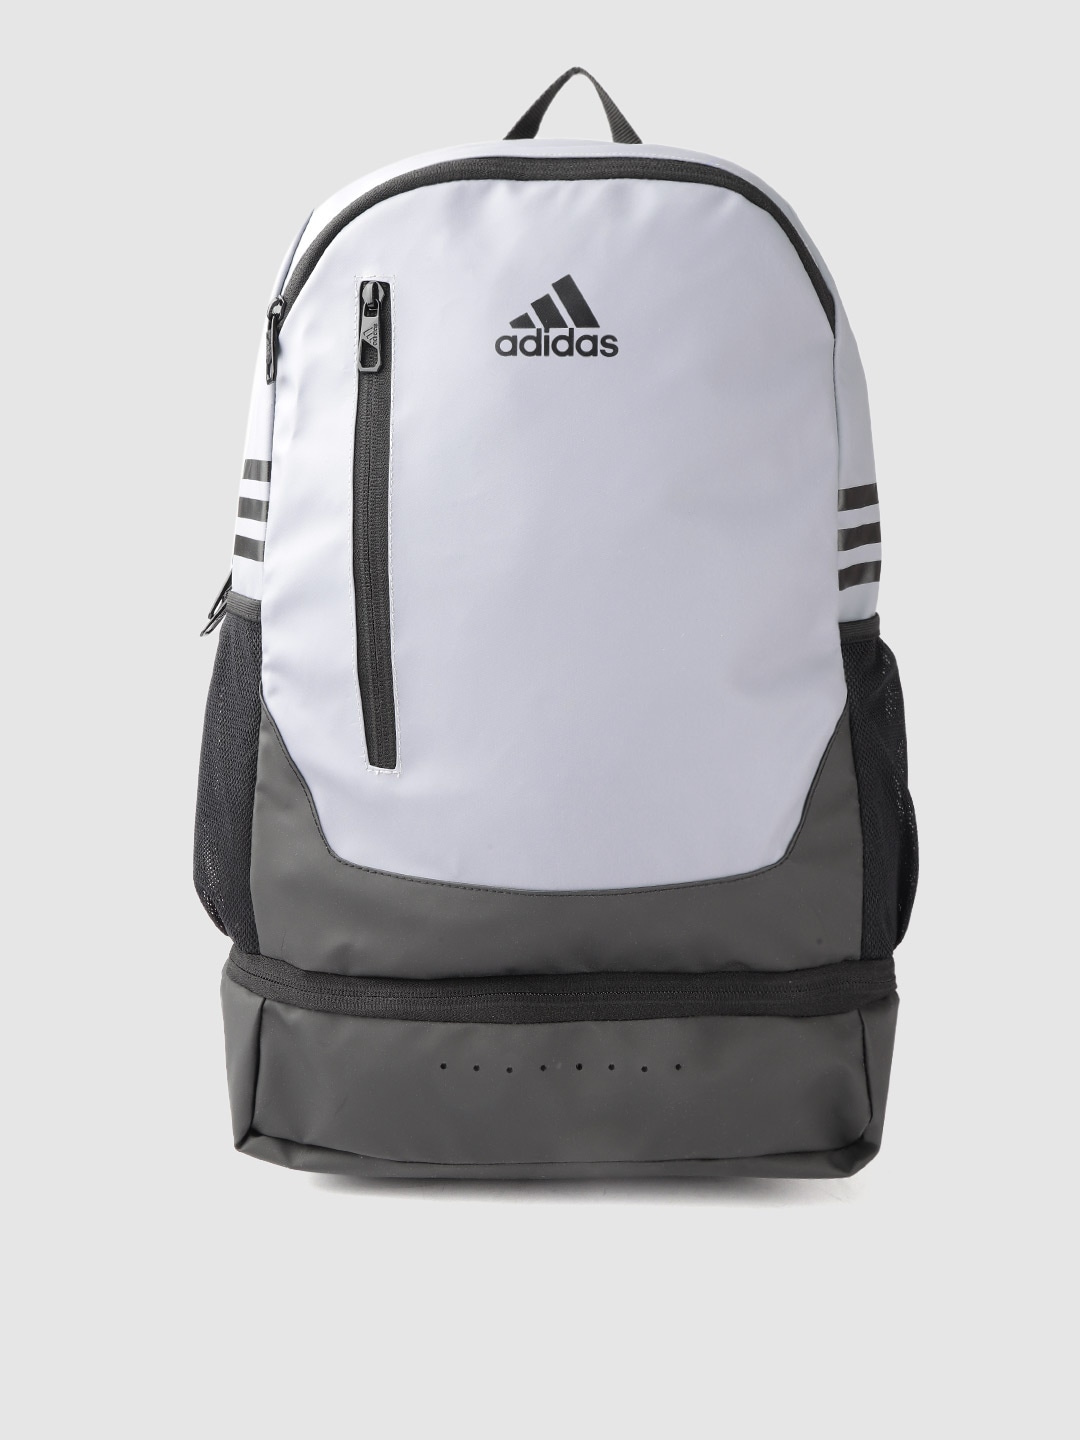 adidas pace backpack